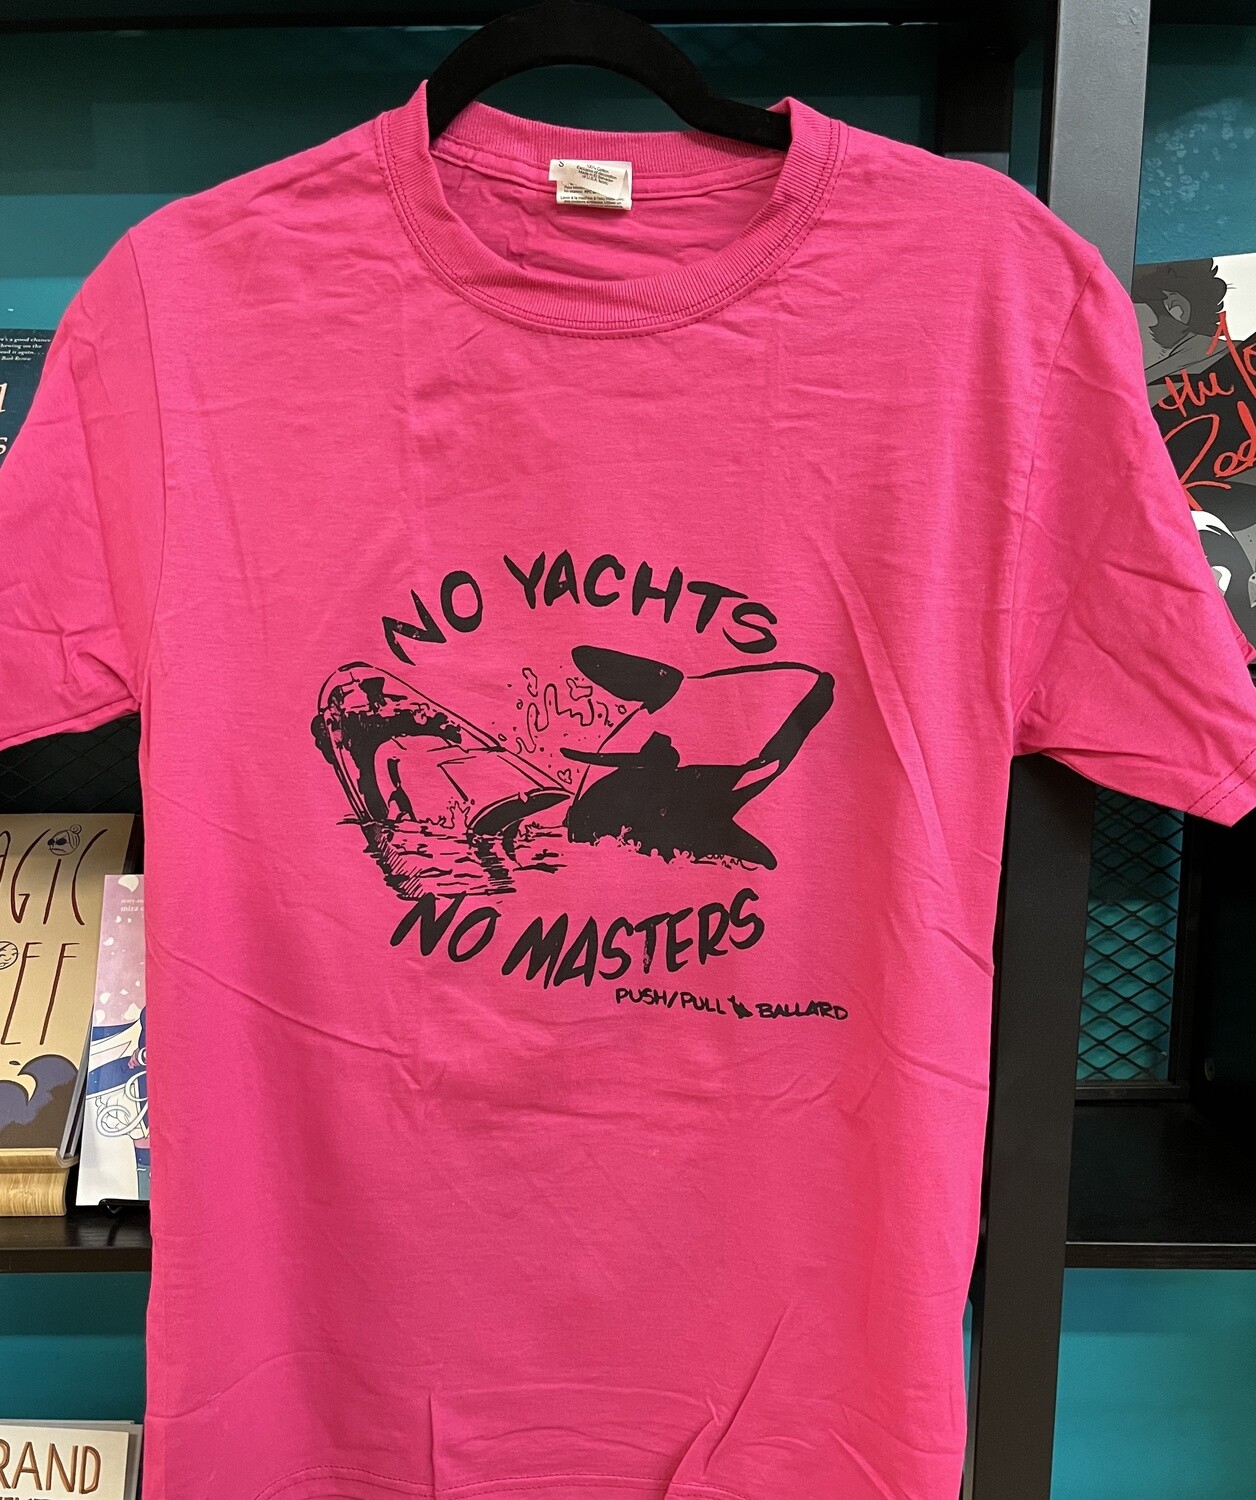 NO YACHTS, NO MASTERS, Fluorescent Pink T-shirt, made by Push/Pull